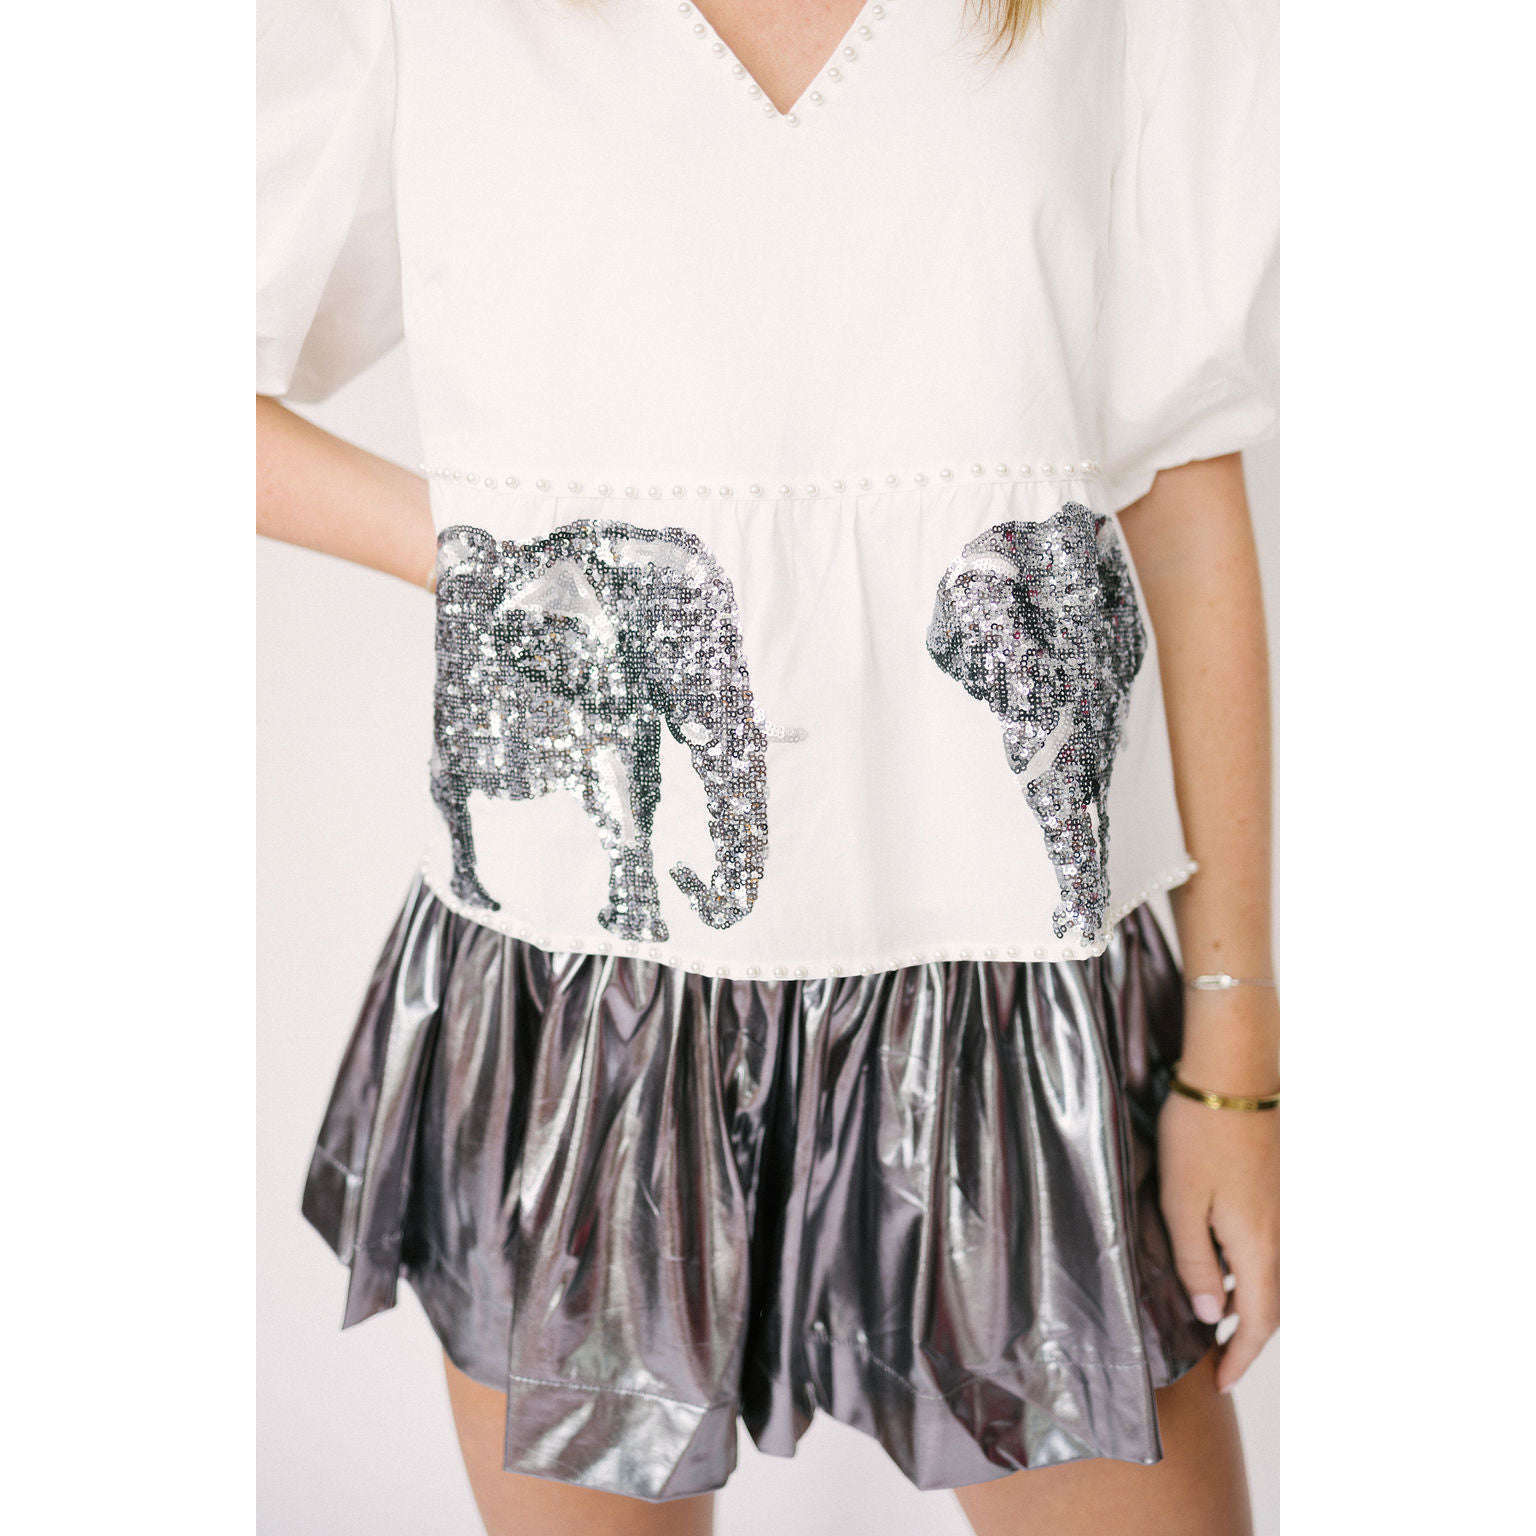 8.28 Boutique:Queen of Sparkles,Queen of Sparkles Peplum Poof Sleeve Top with Elephants,Shirts & Tops